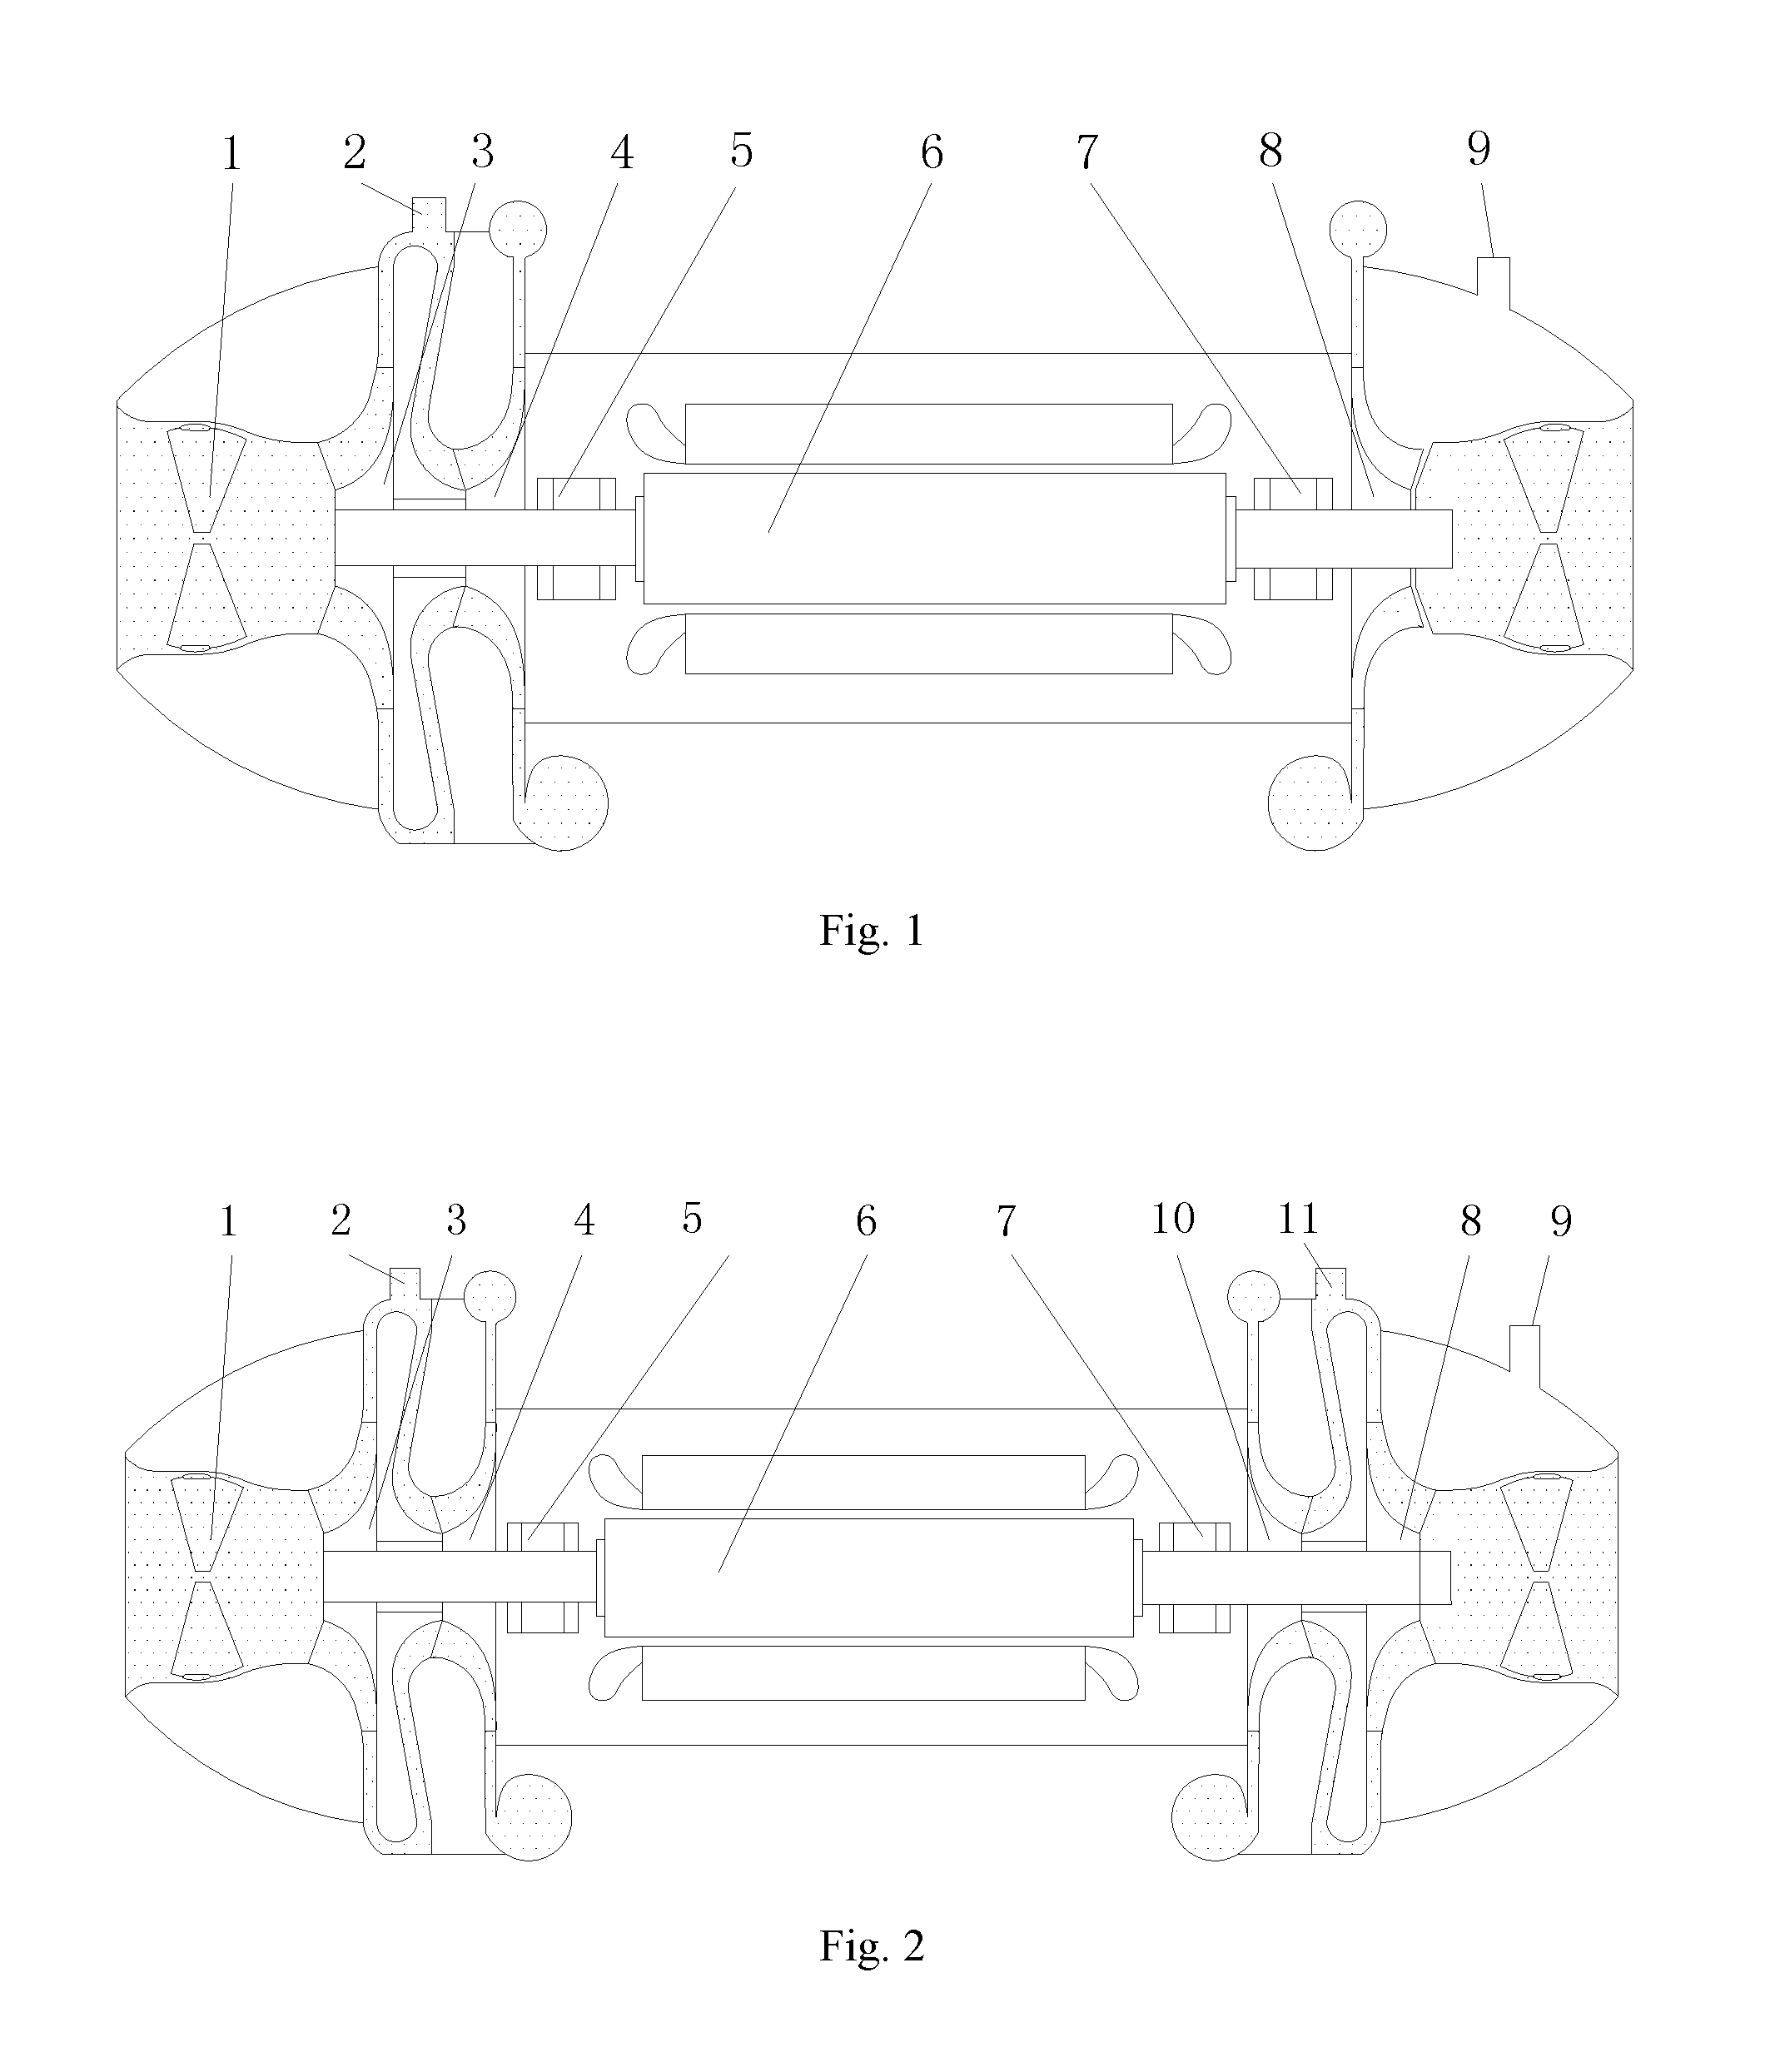 Multi-stage centrifugal compressor and air conditioning unit